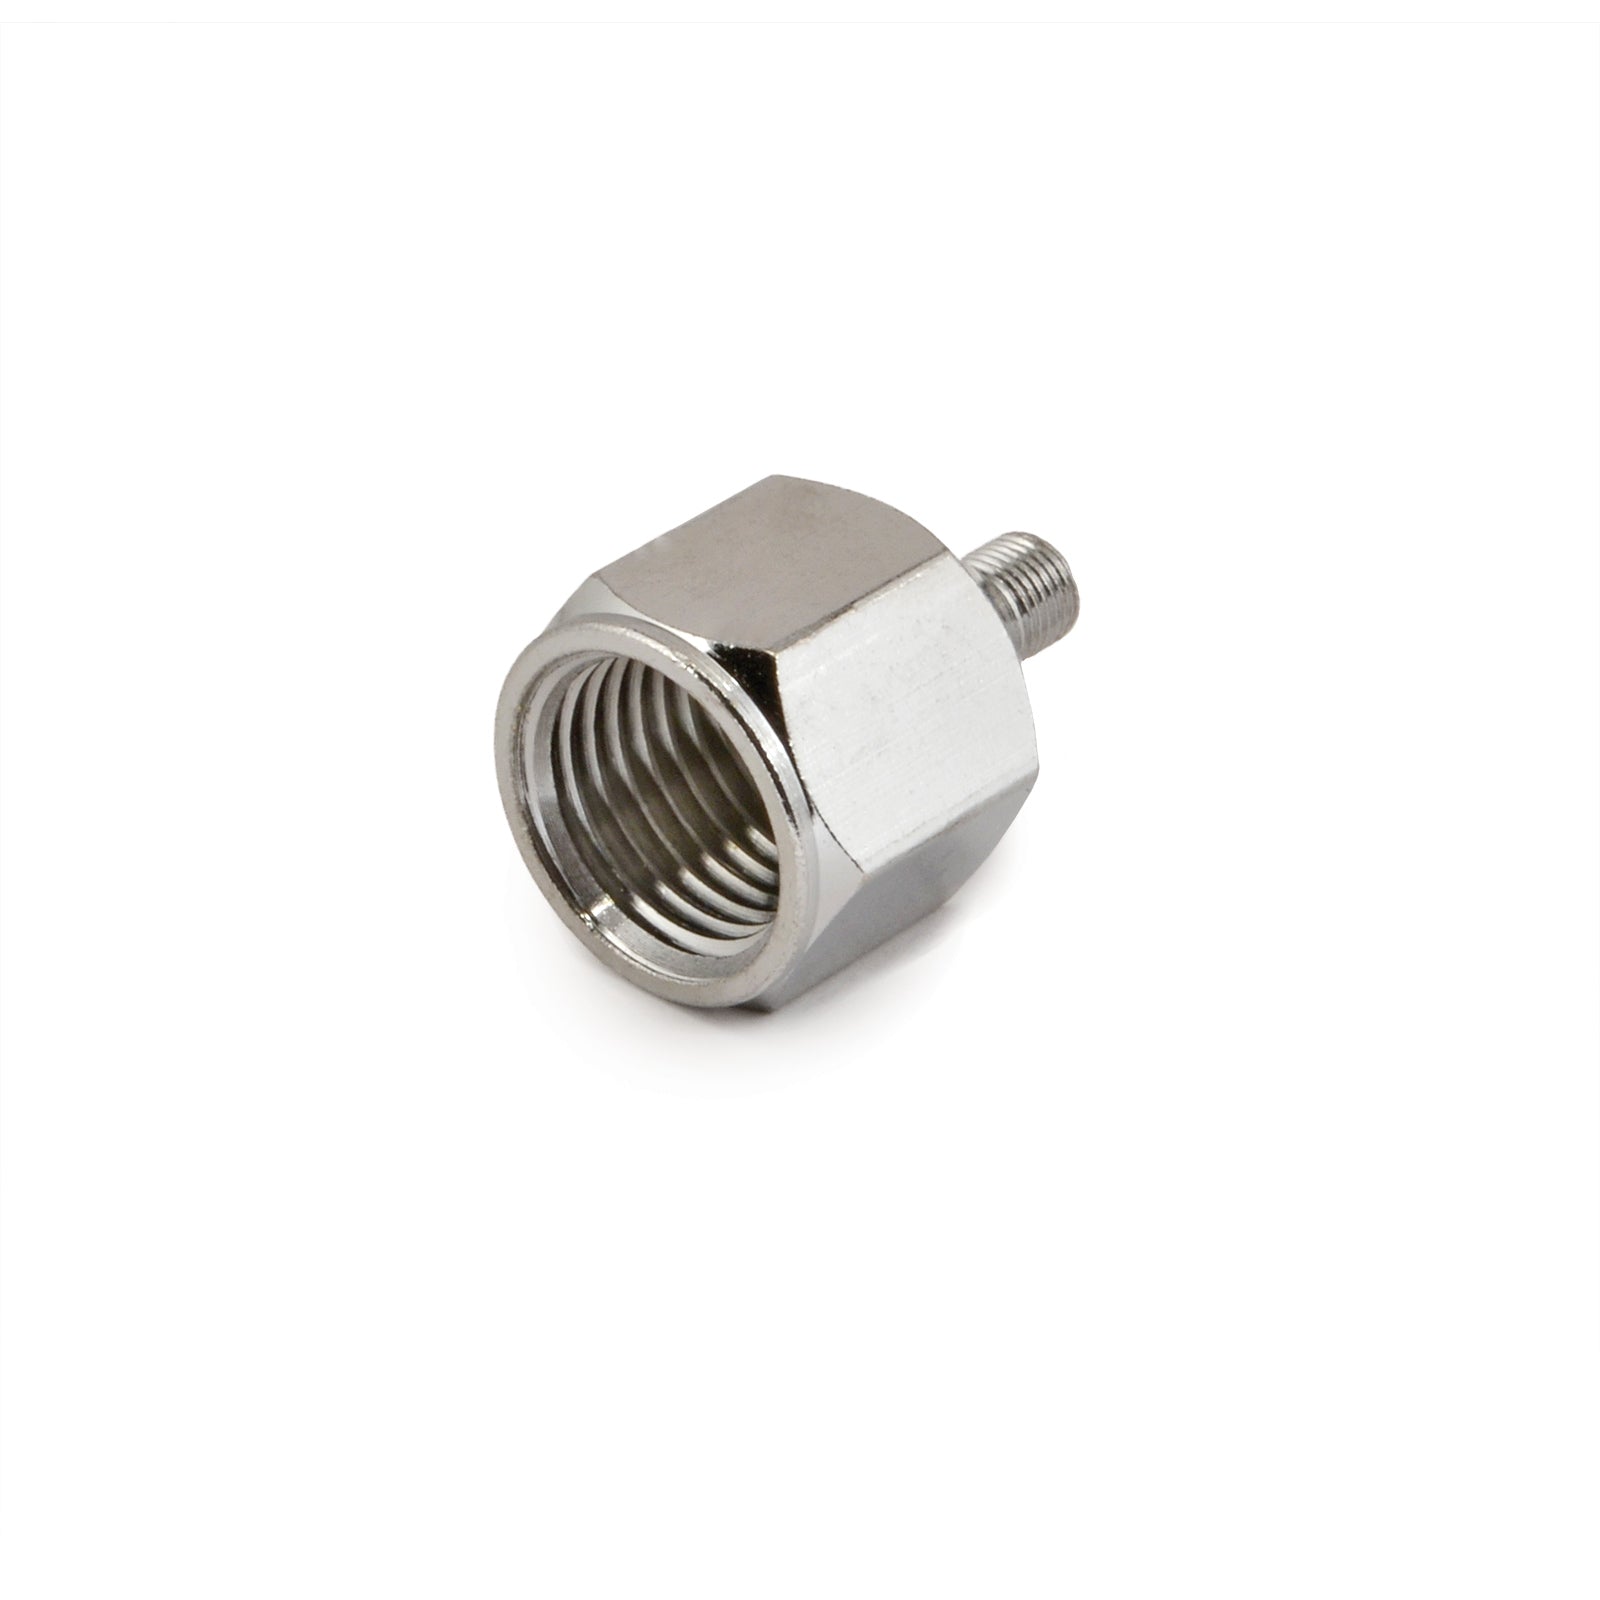 Air Line Adapter for Airbrushes, M5x0.5 BSP Male to 1/4 Inch BSP Female - Micro - Mark Airbrush Accessories